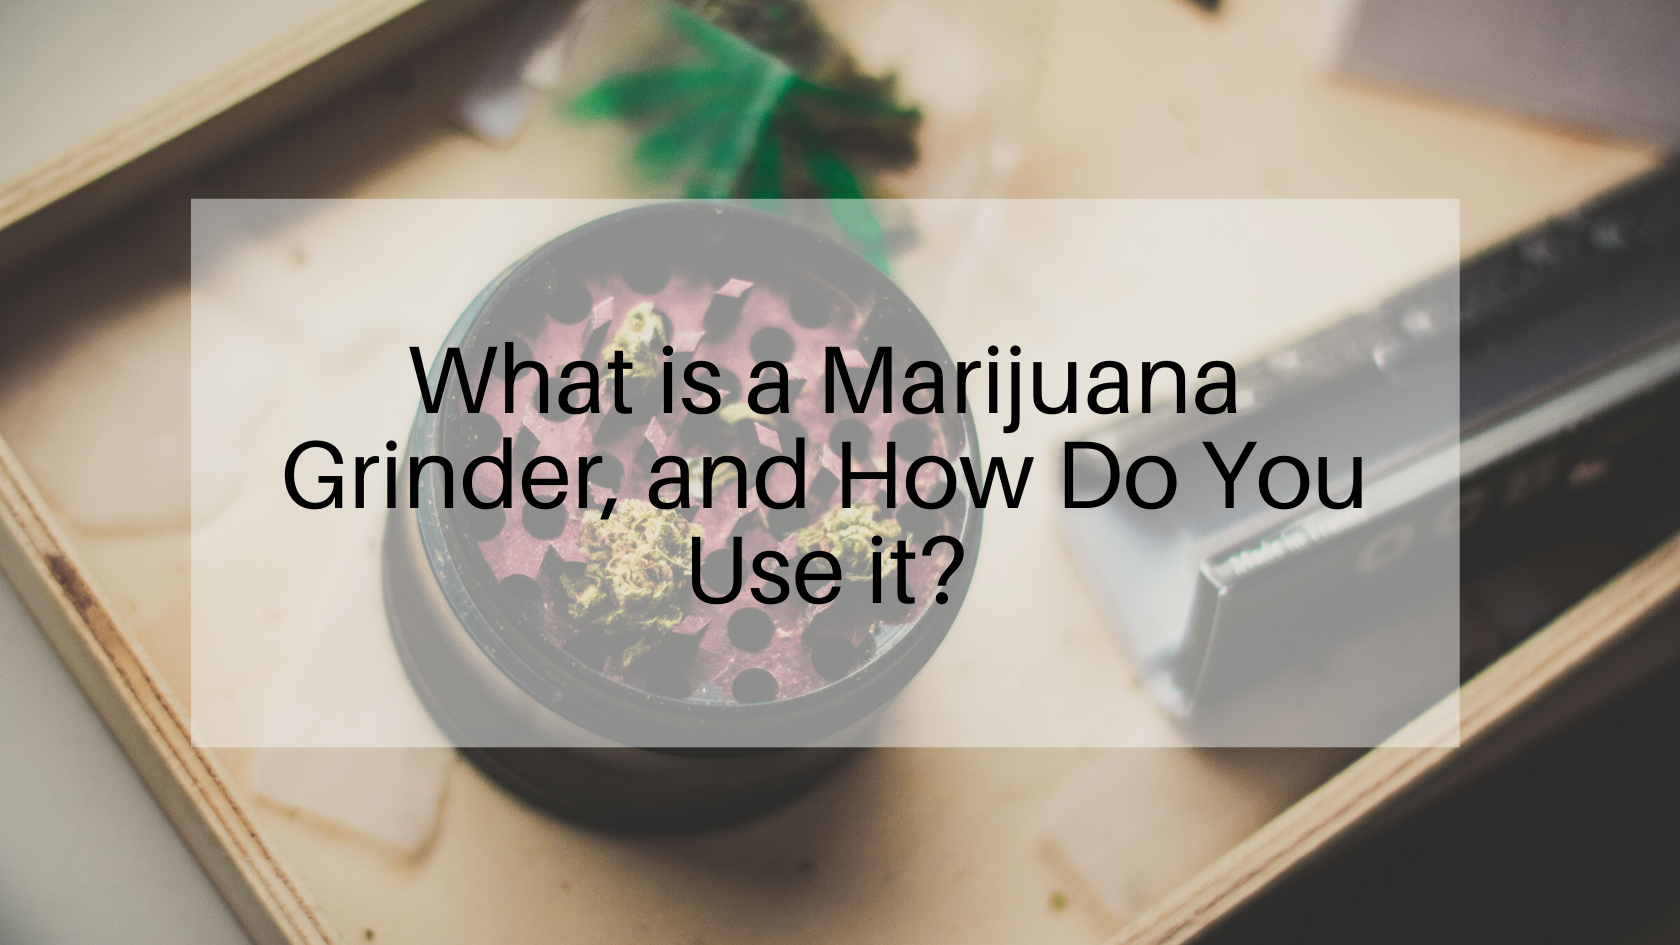 What is a Marijuana Grinder, and How Do You Use it?